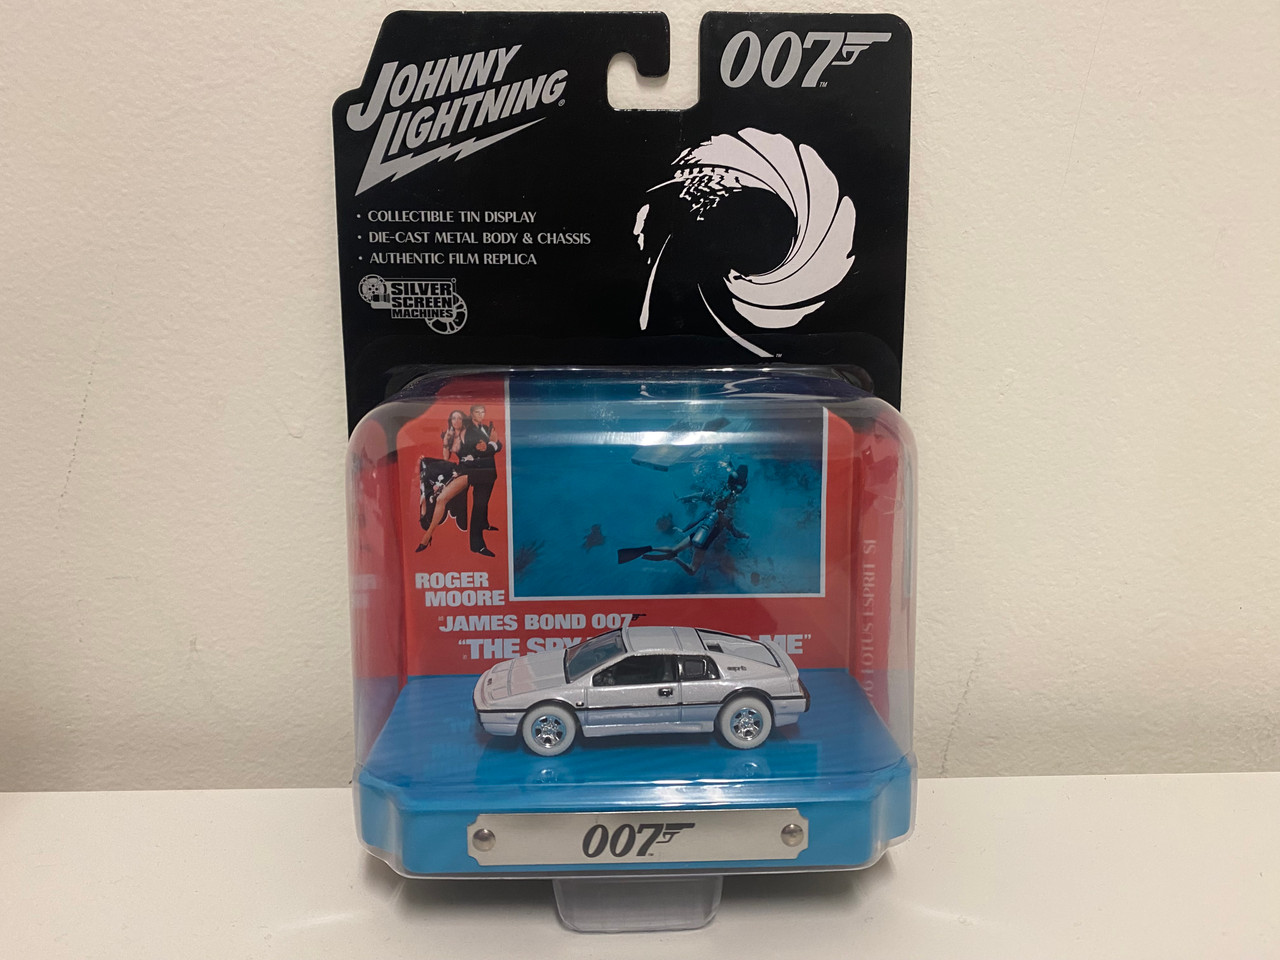 CHASE CAR 1976 Lotus Esprit S1 White with Collectible Tin Display "007" (James Bond) "The Spy Who Loved Me" (1977) Movie (10th in the James Bond Series) 1/64 Diecast Model Car by Johnny Lightning